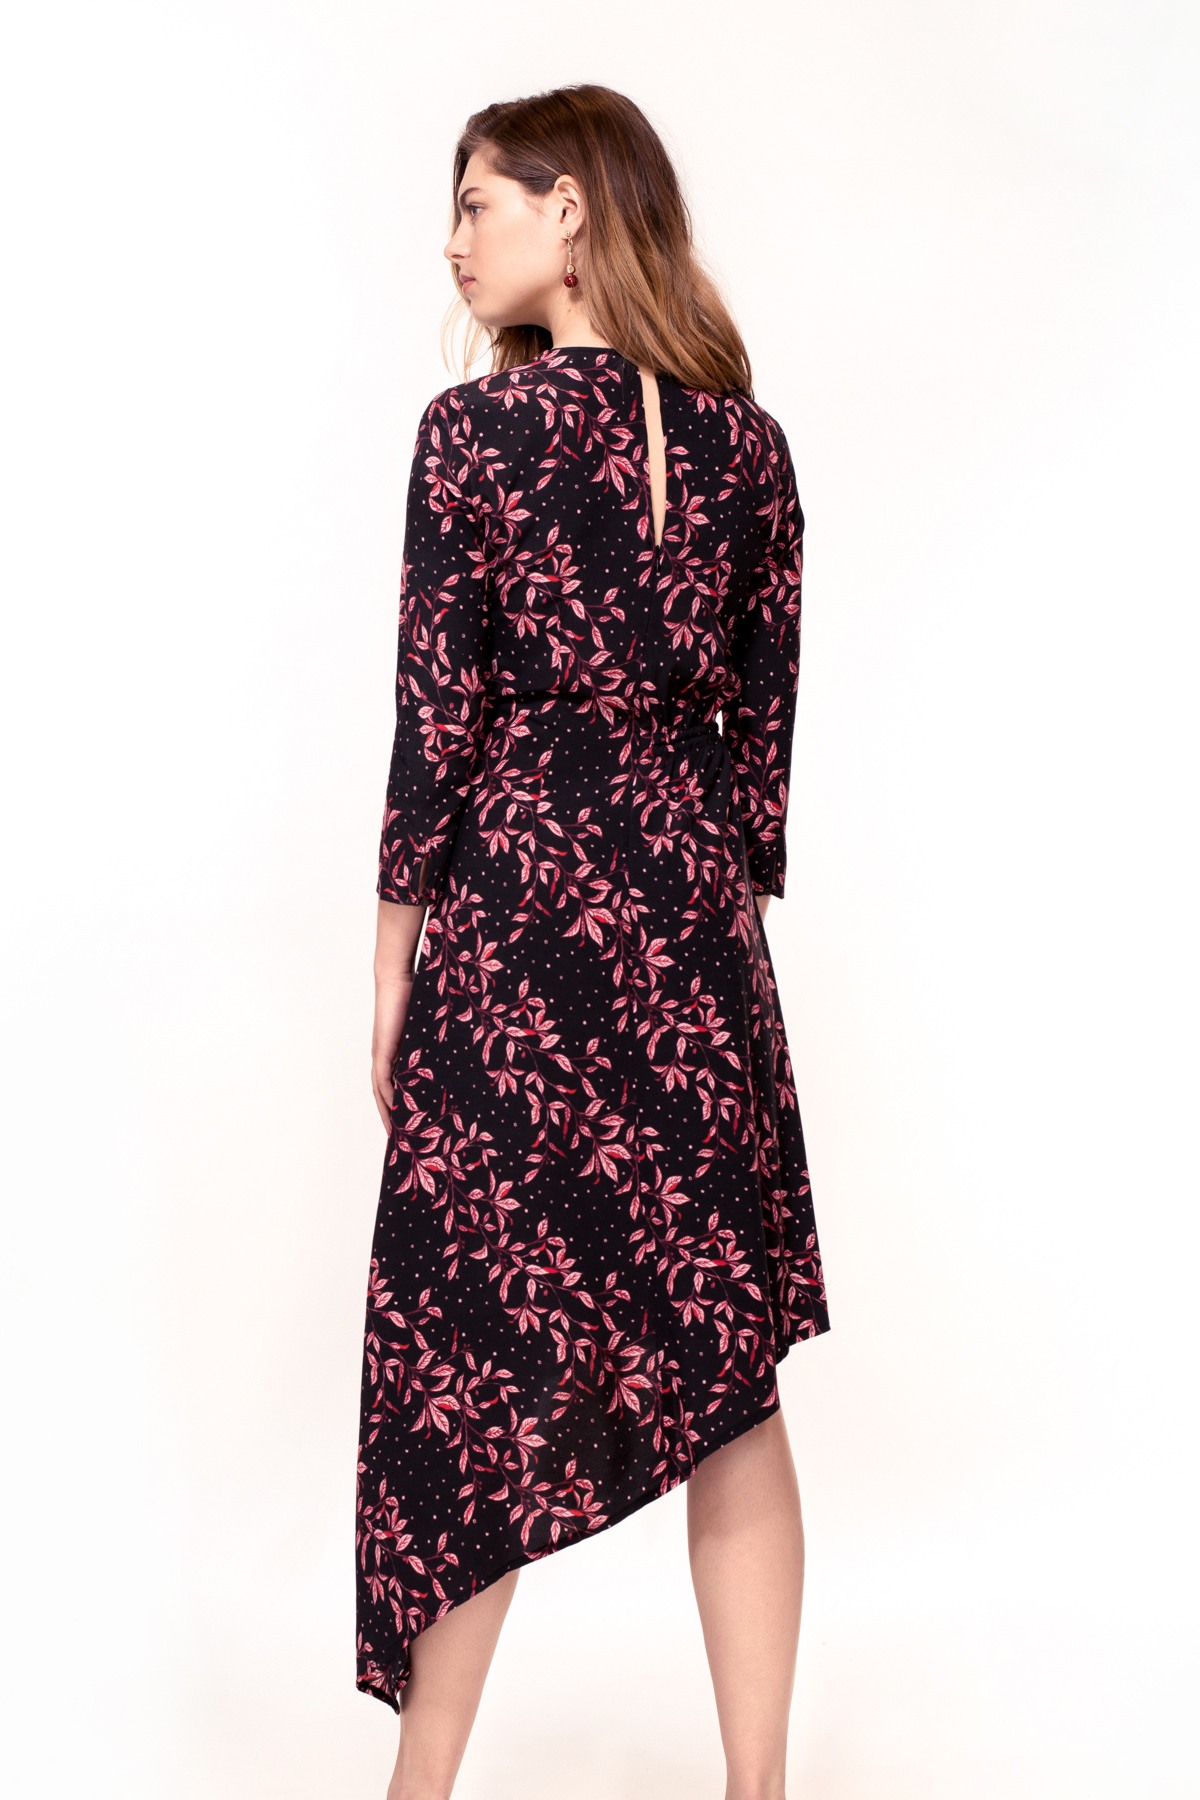 Hide the Label Azalea Dress in Pink Leaf Print, available on ZERRIN